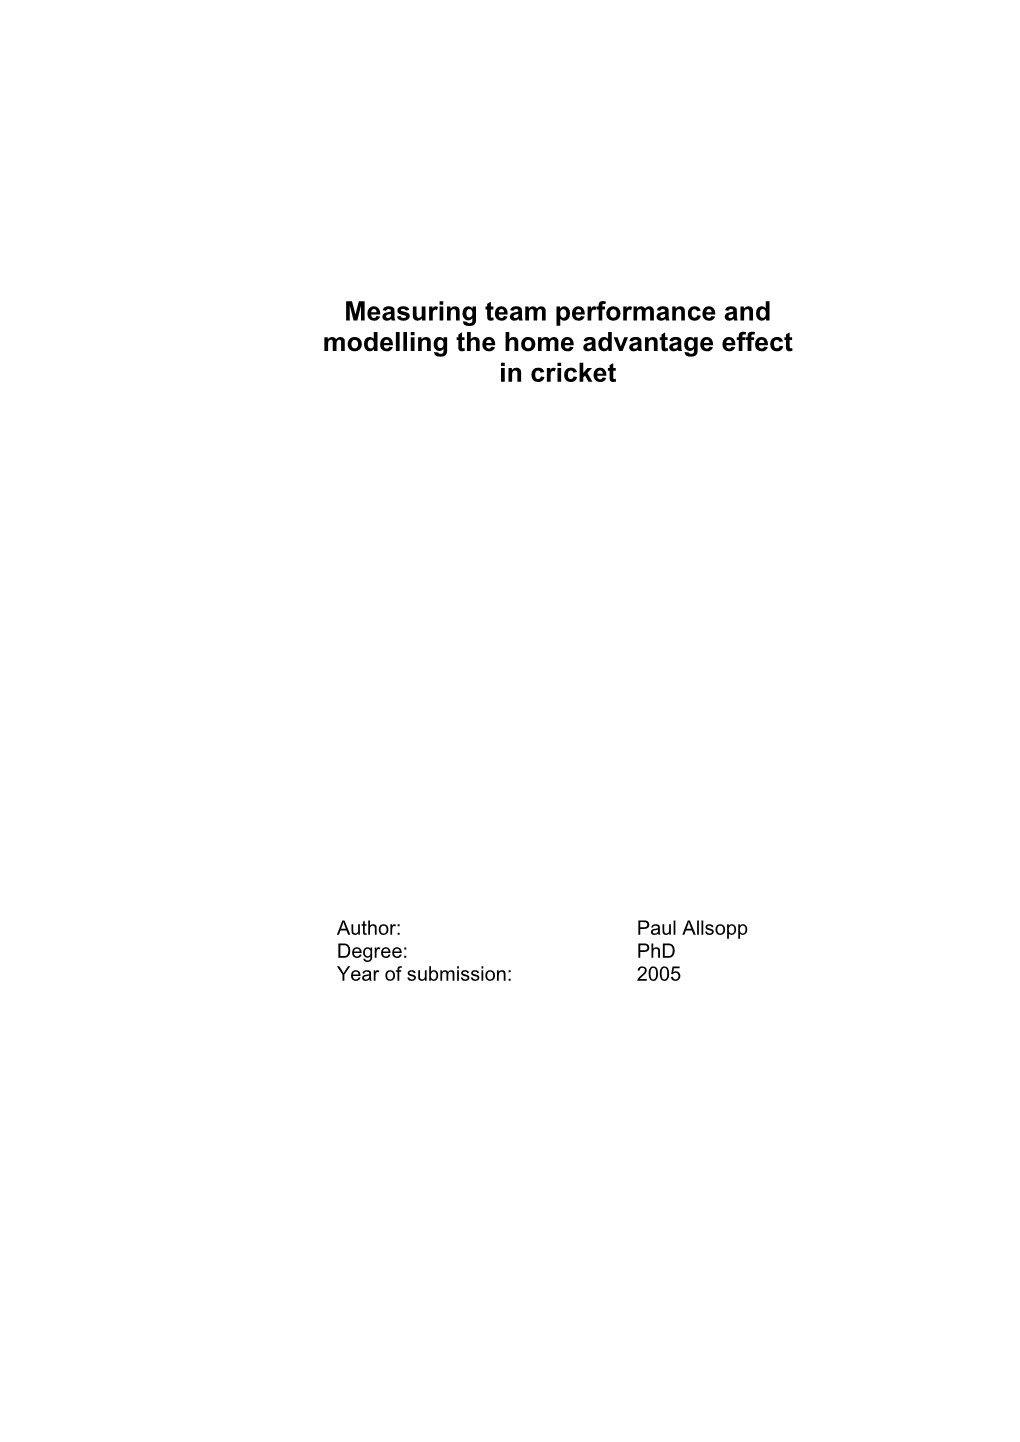 Measuring Team Performance and Modelling the Home Advantage Effect in Cricket